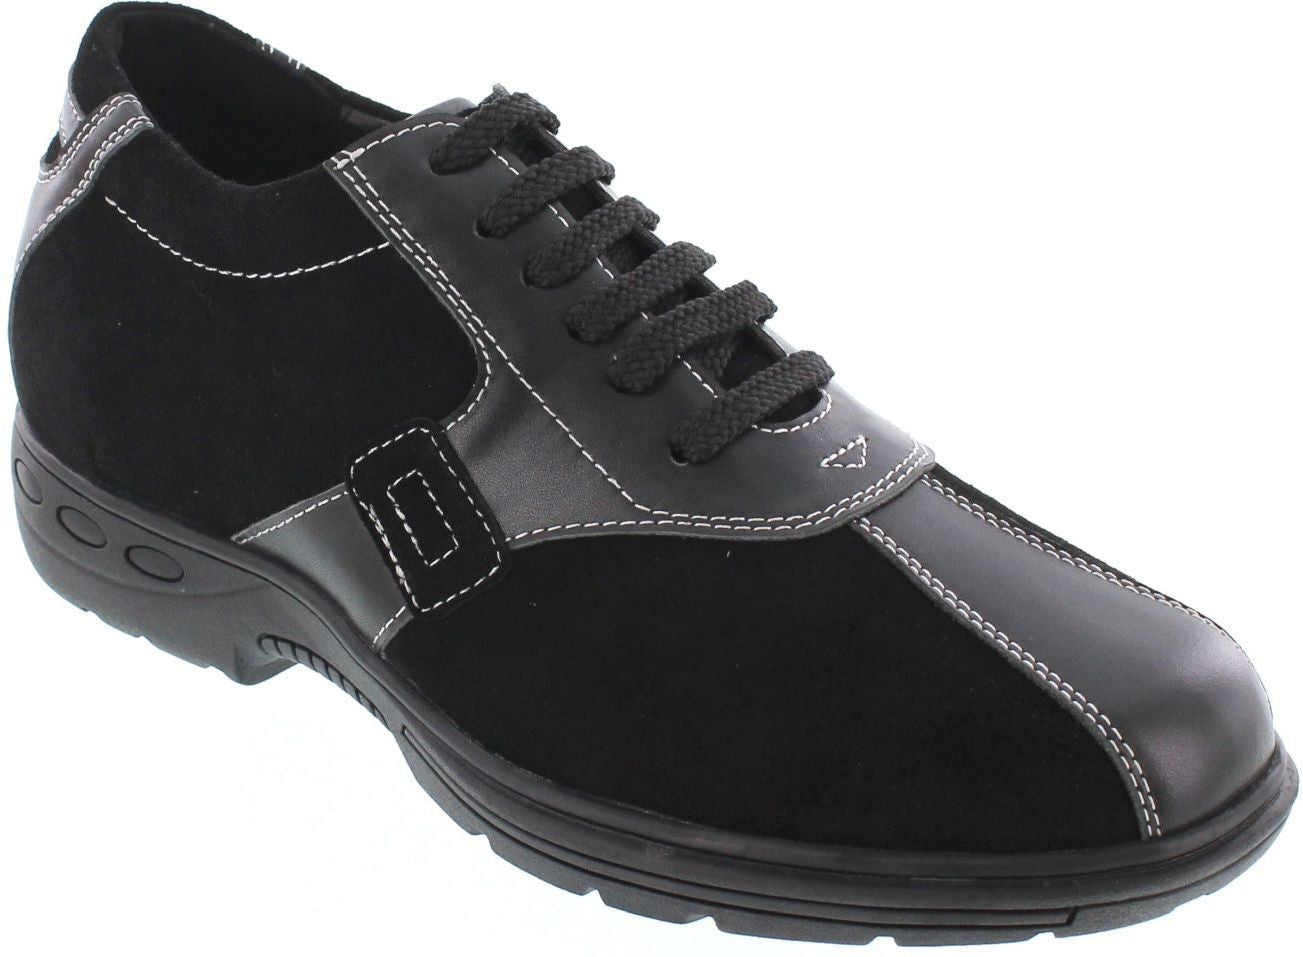 Elevator shoes height increase TOTO - V0505A - 2.6 Inches Taller (Black)